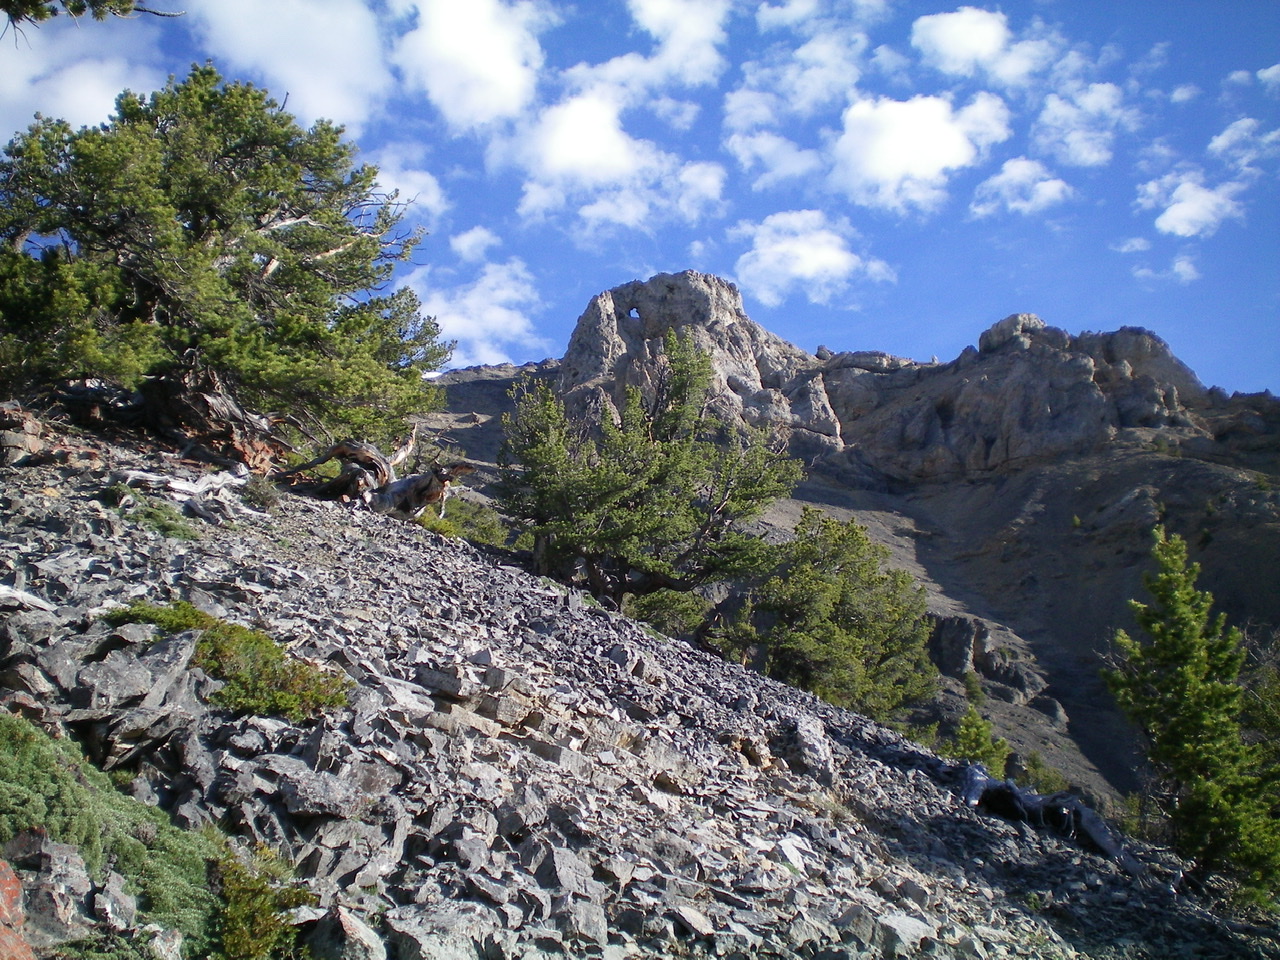 A view of the “window rock” on the [lower] Southwest Summit of Medusa, as viewed from the Southeast Shoulder. Livingston Douglas Photo 